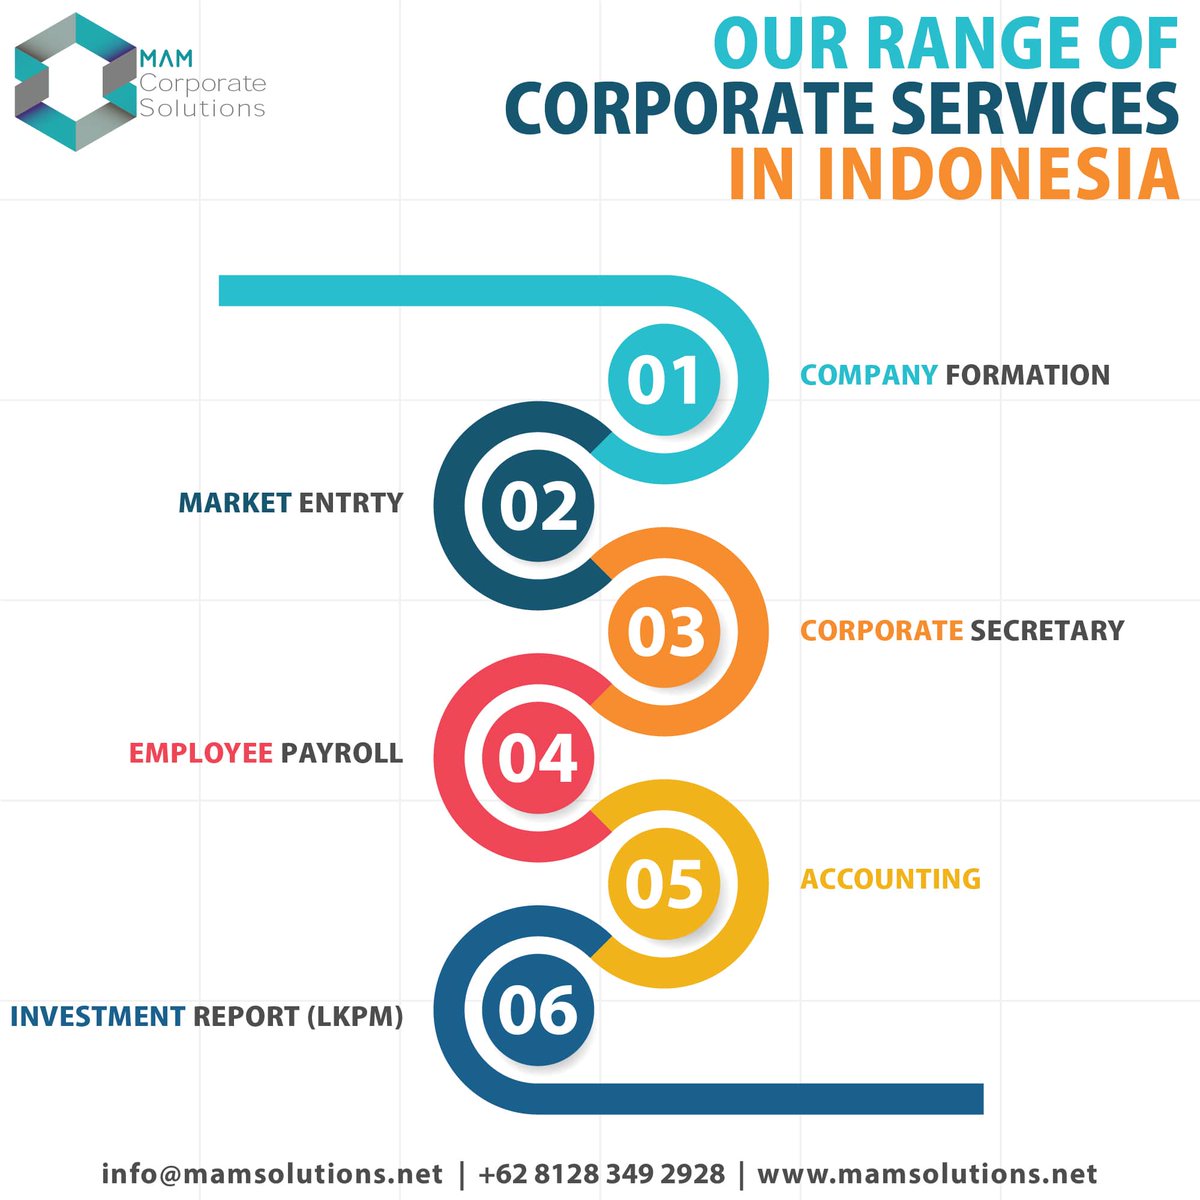 🔗 Read the full article: zurl.co/tA7i 

#corporateservices #EOR #companyformation #payroll #LKPM #business #Indonesi